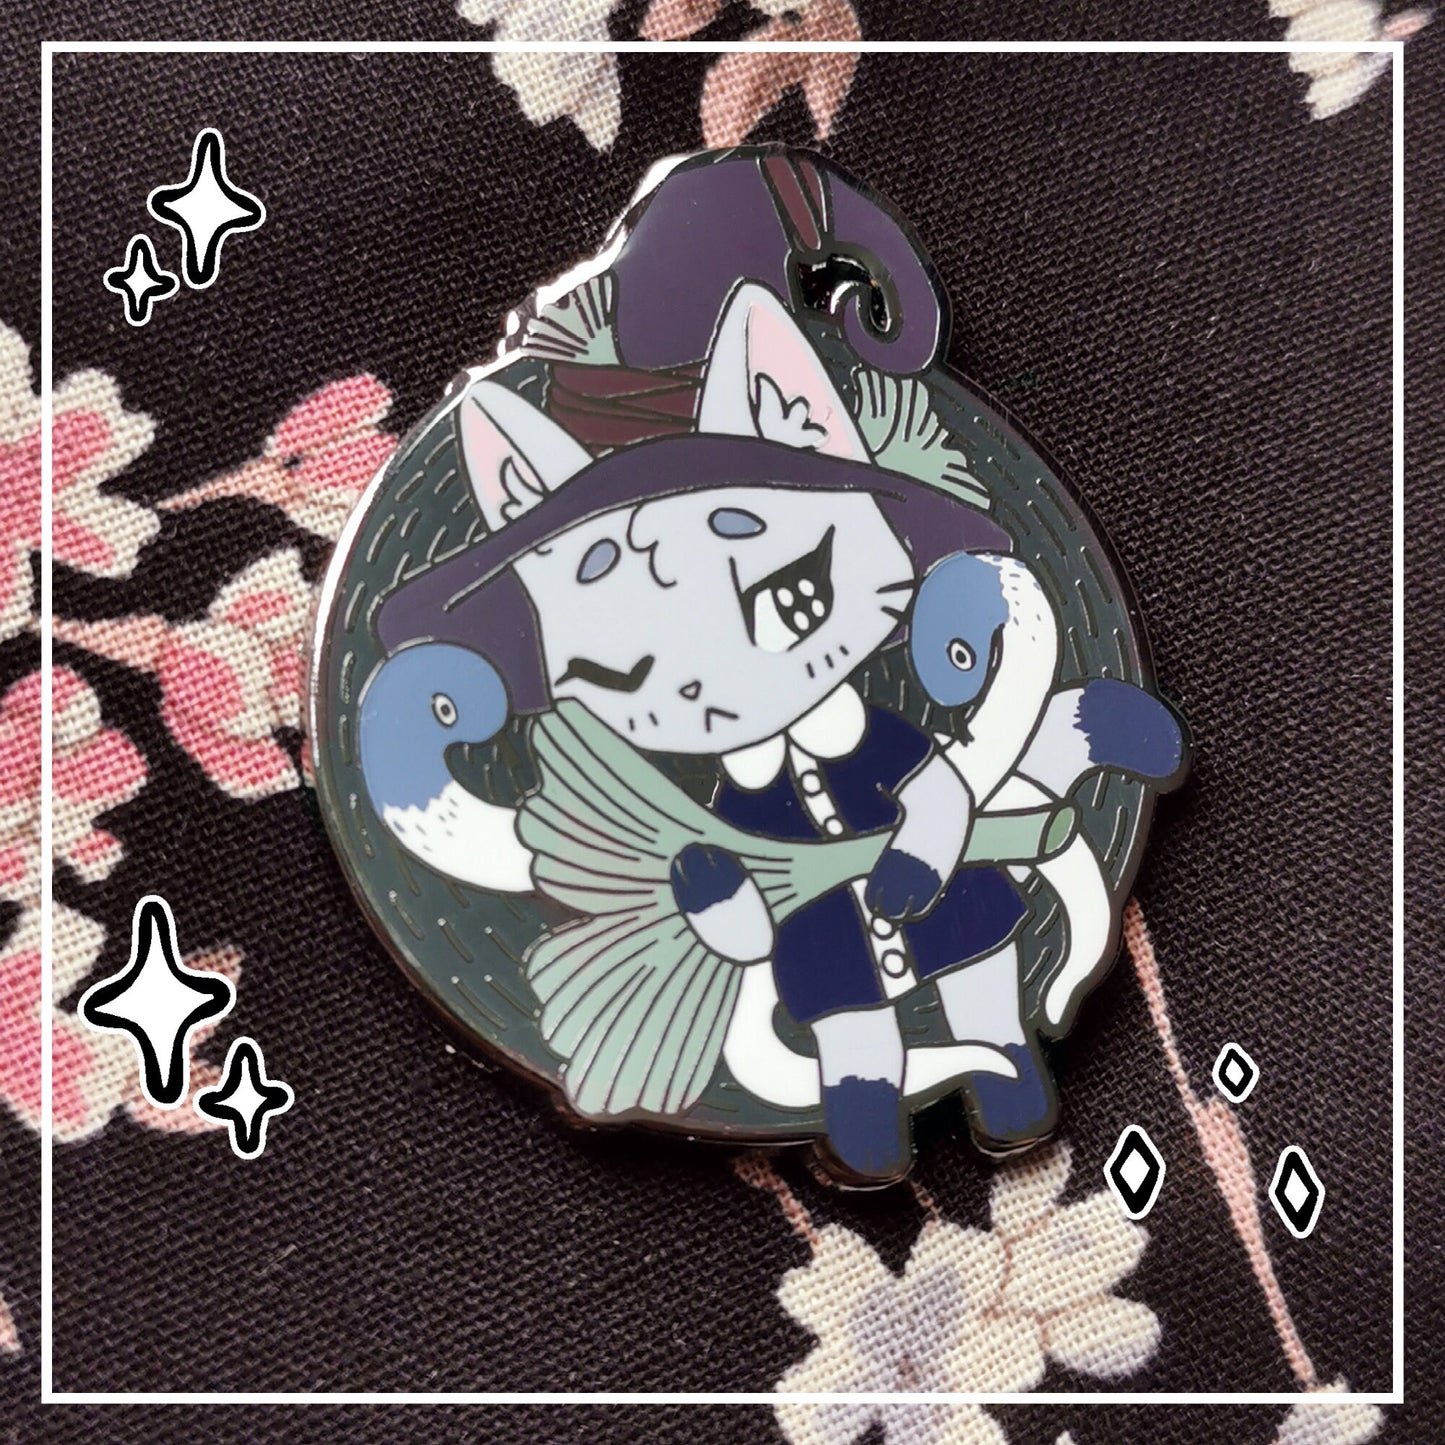 Myuna's Eternal Witch Pin - Little Witch Acatemia Cat Witch Pins - Cute Cat Ginkgo Witch talismans, Kawaii Witchy Occult Hard Enamel Pins